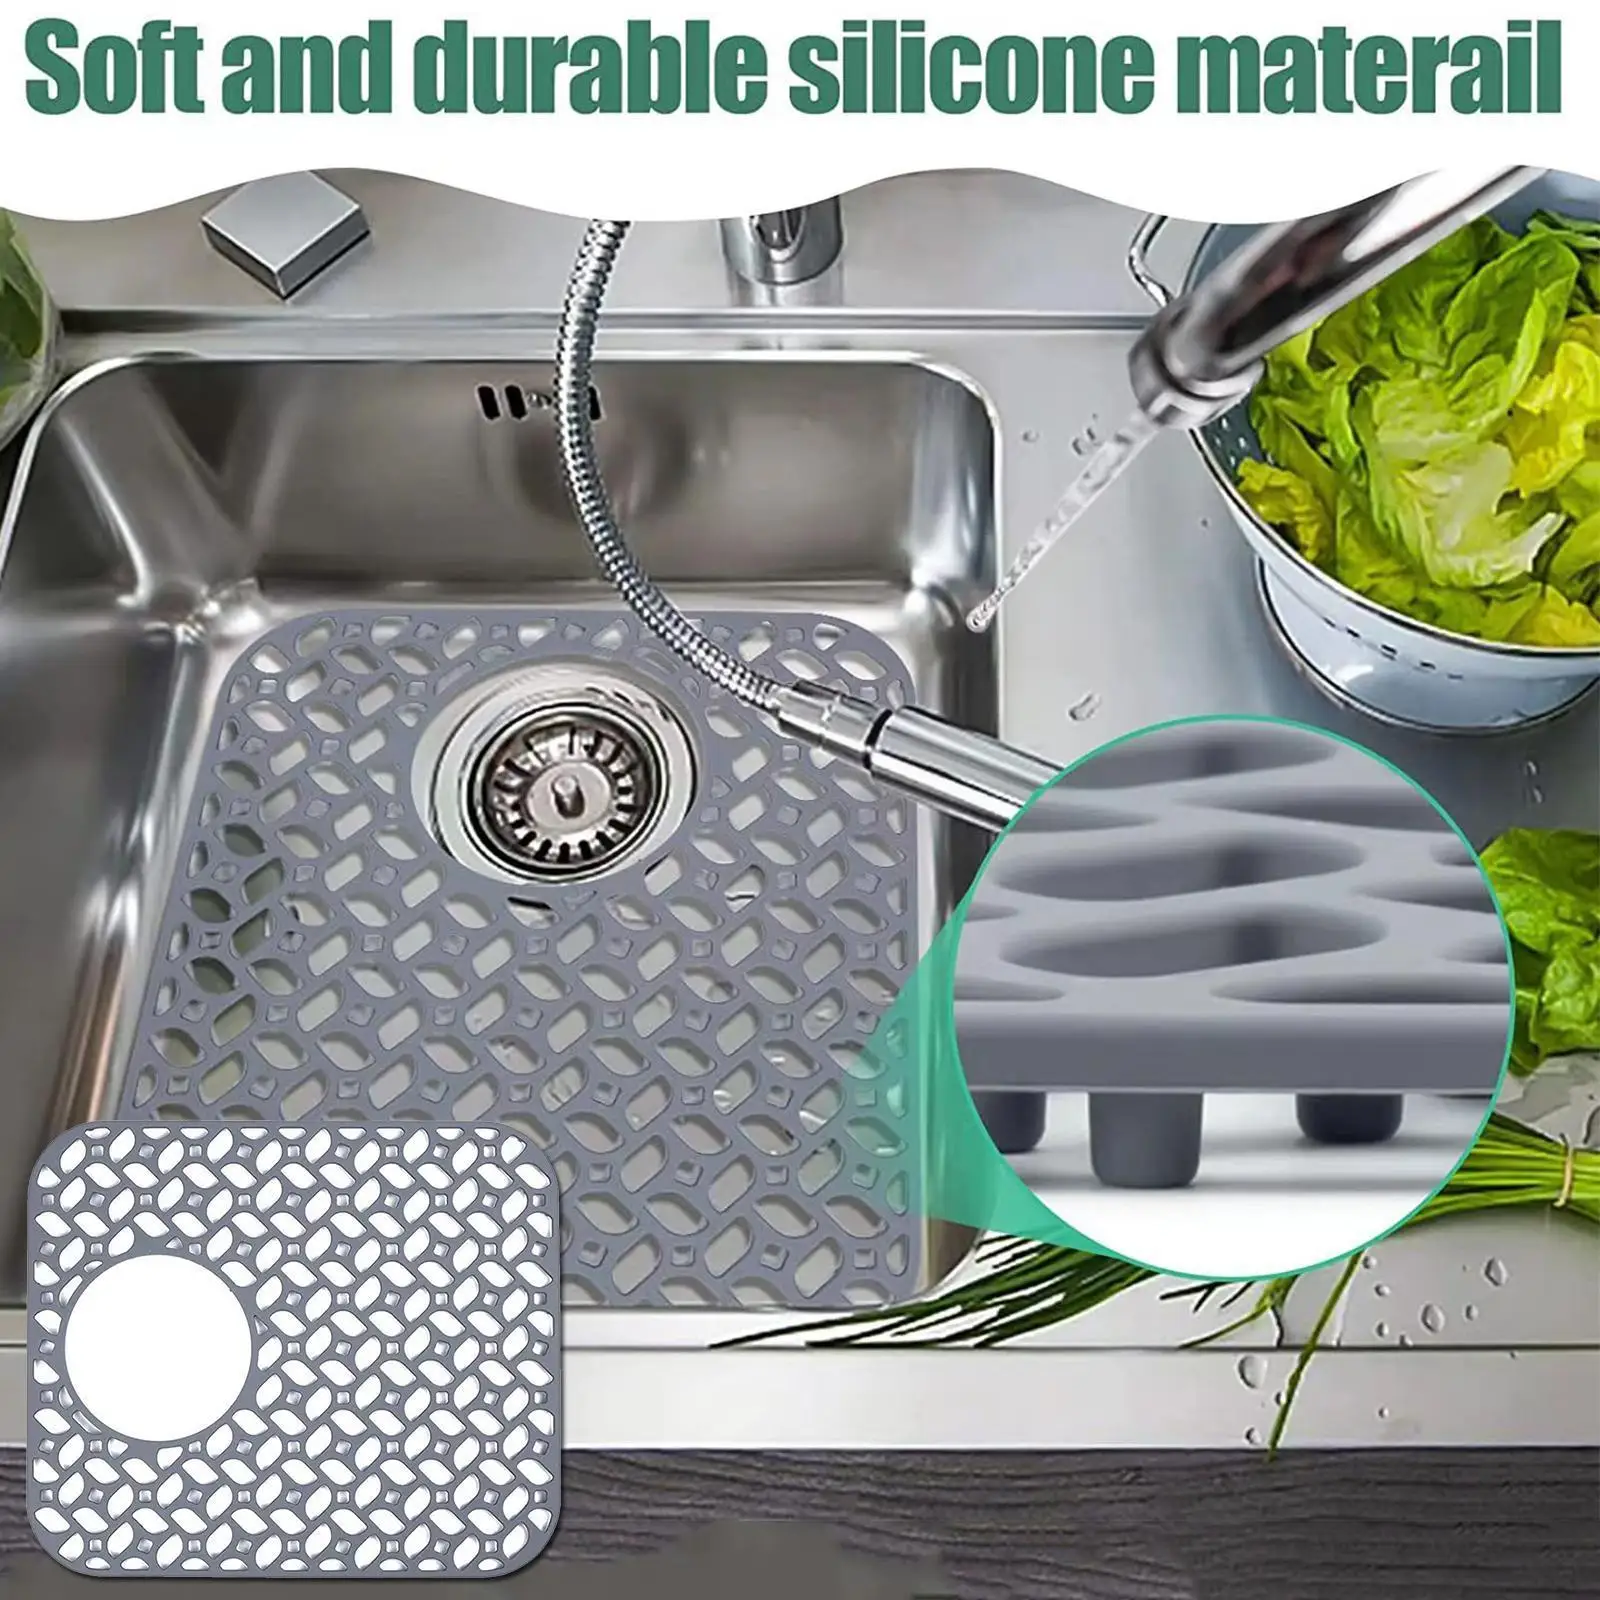 Silicone Sink Protector Multi-purpose Sink Mat Vegetables Drainer Sink Slip Anti Drying Grid Dishware Dish Draining Board I7S9